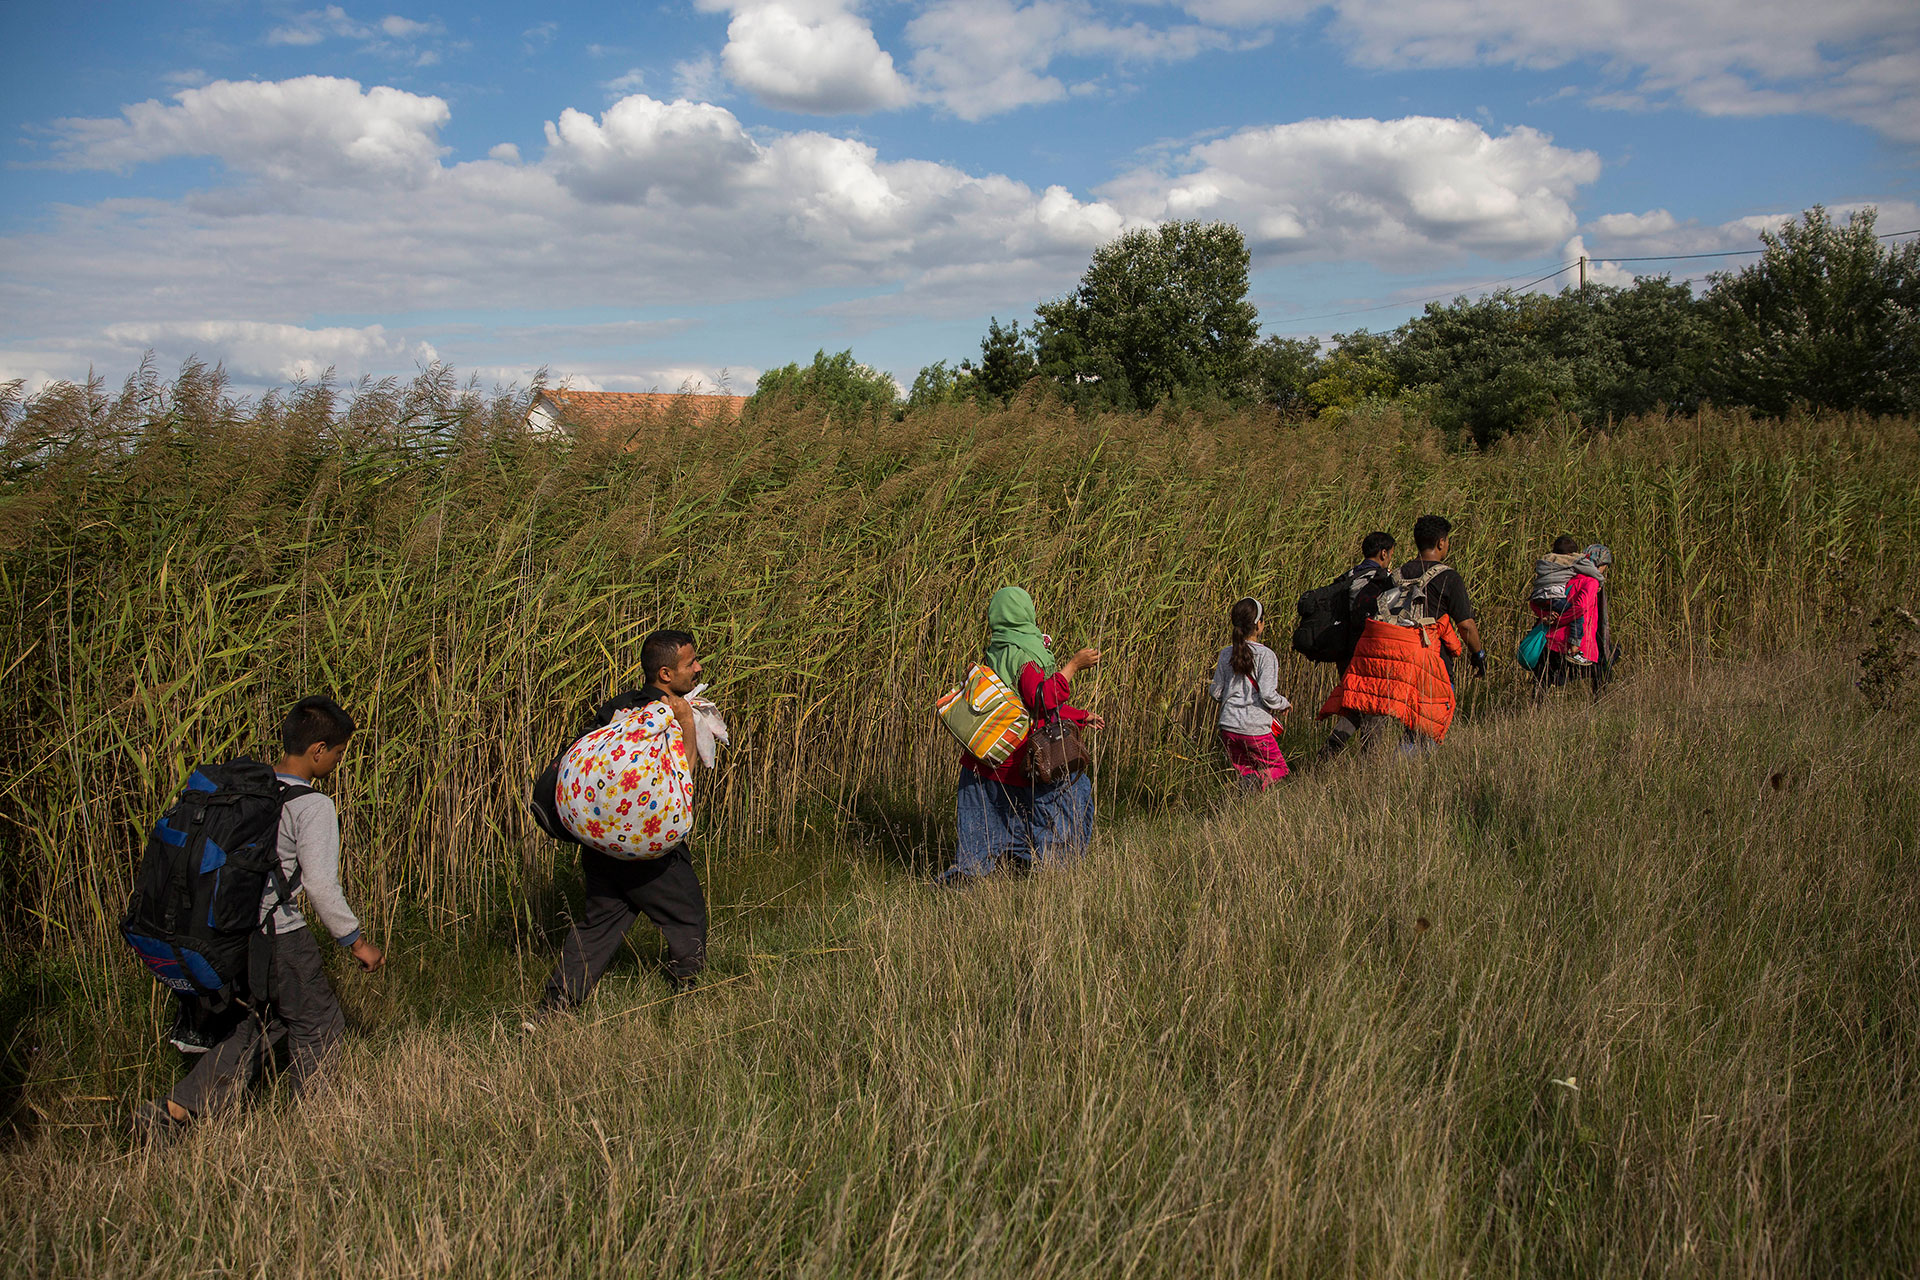 A family of refugees walks through farmlands in the Hungarian town of Roszke, on the border with Serbia, after fleeing from a police cordon. (Roszke, Hungary. 08/09/2015).